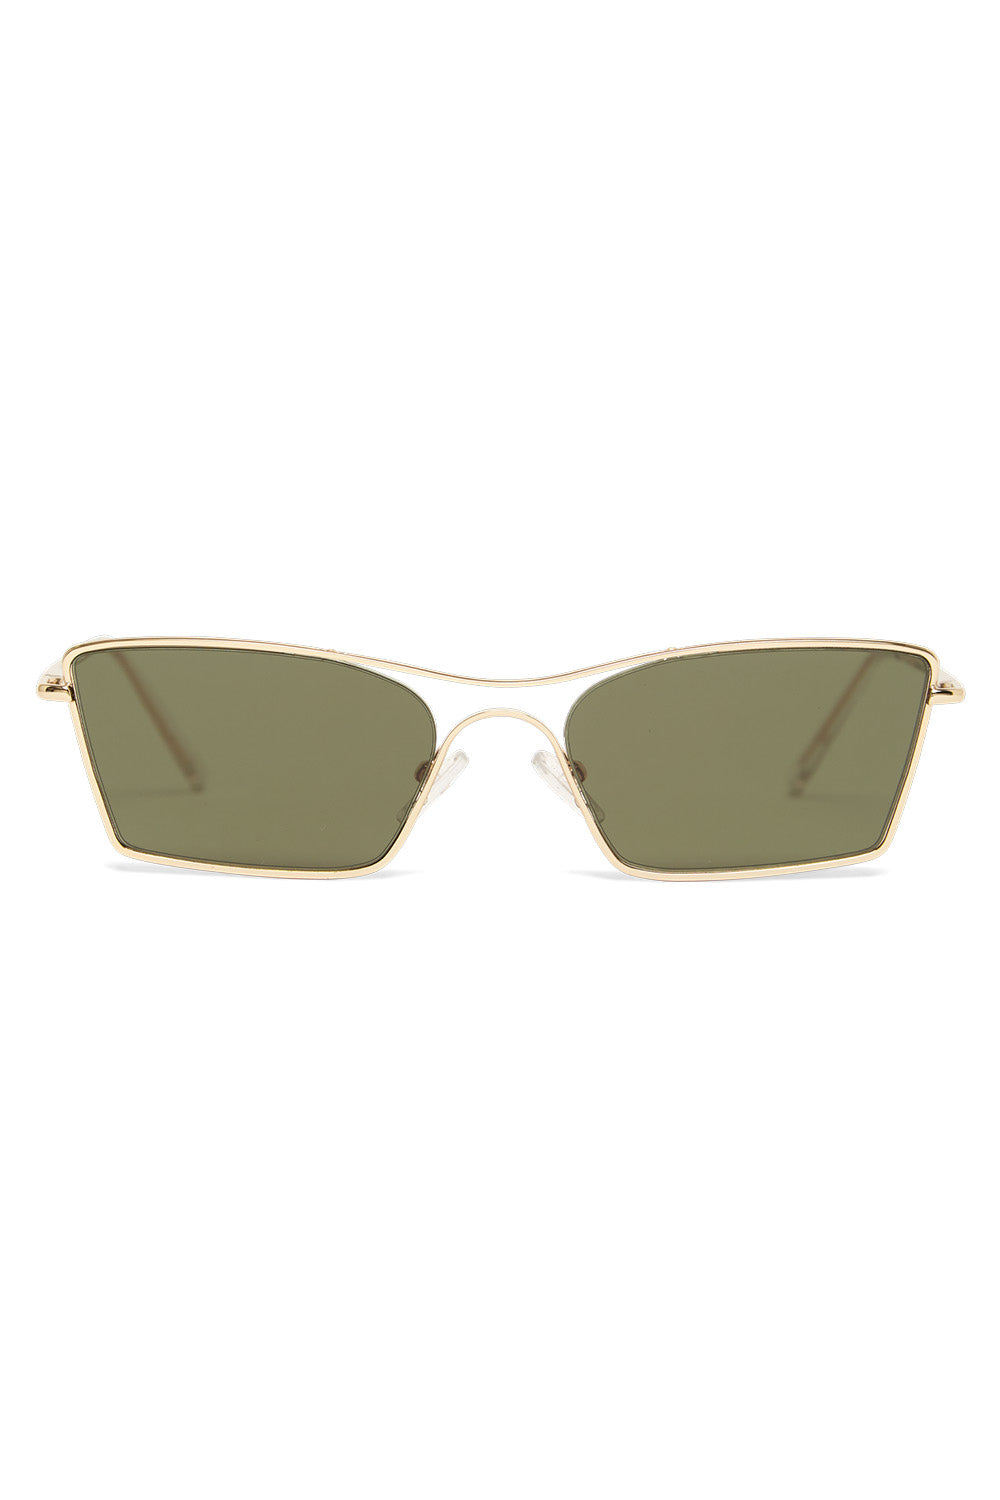 Banbe - The Beverly - Gold-Olive - Front